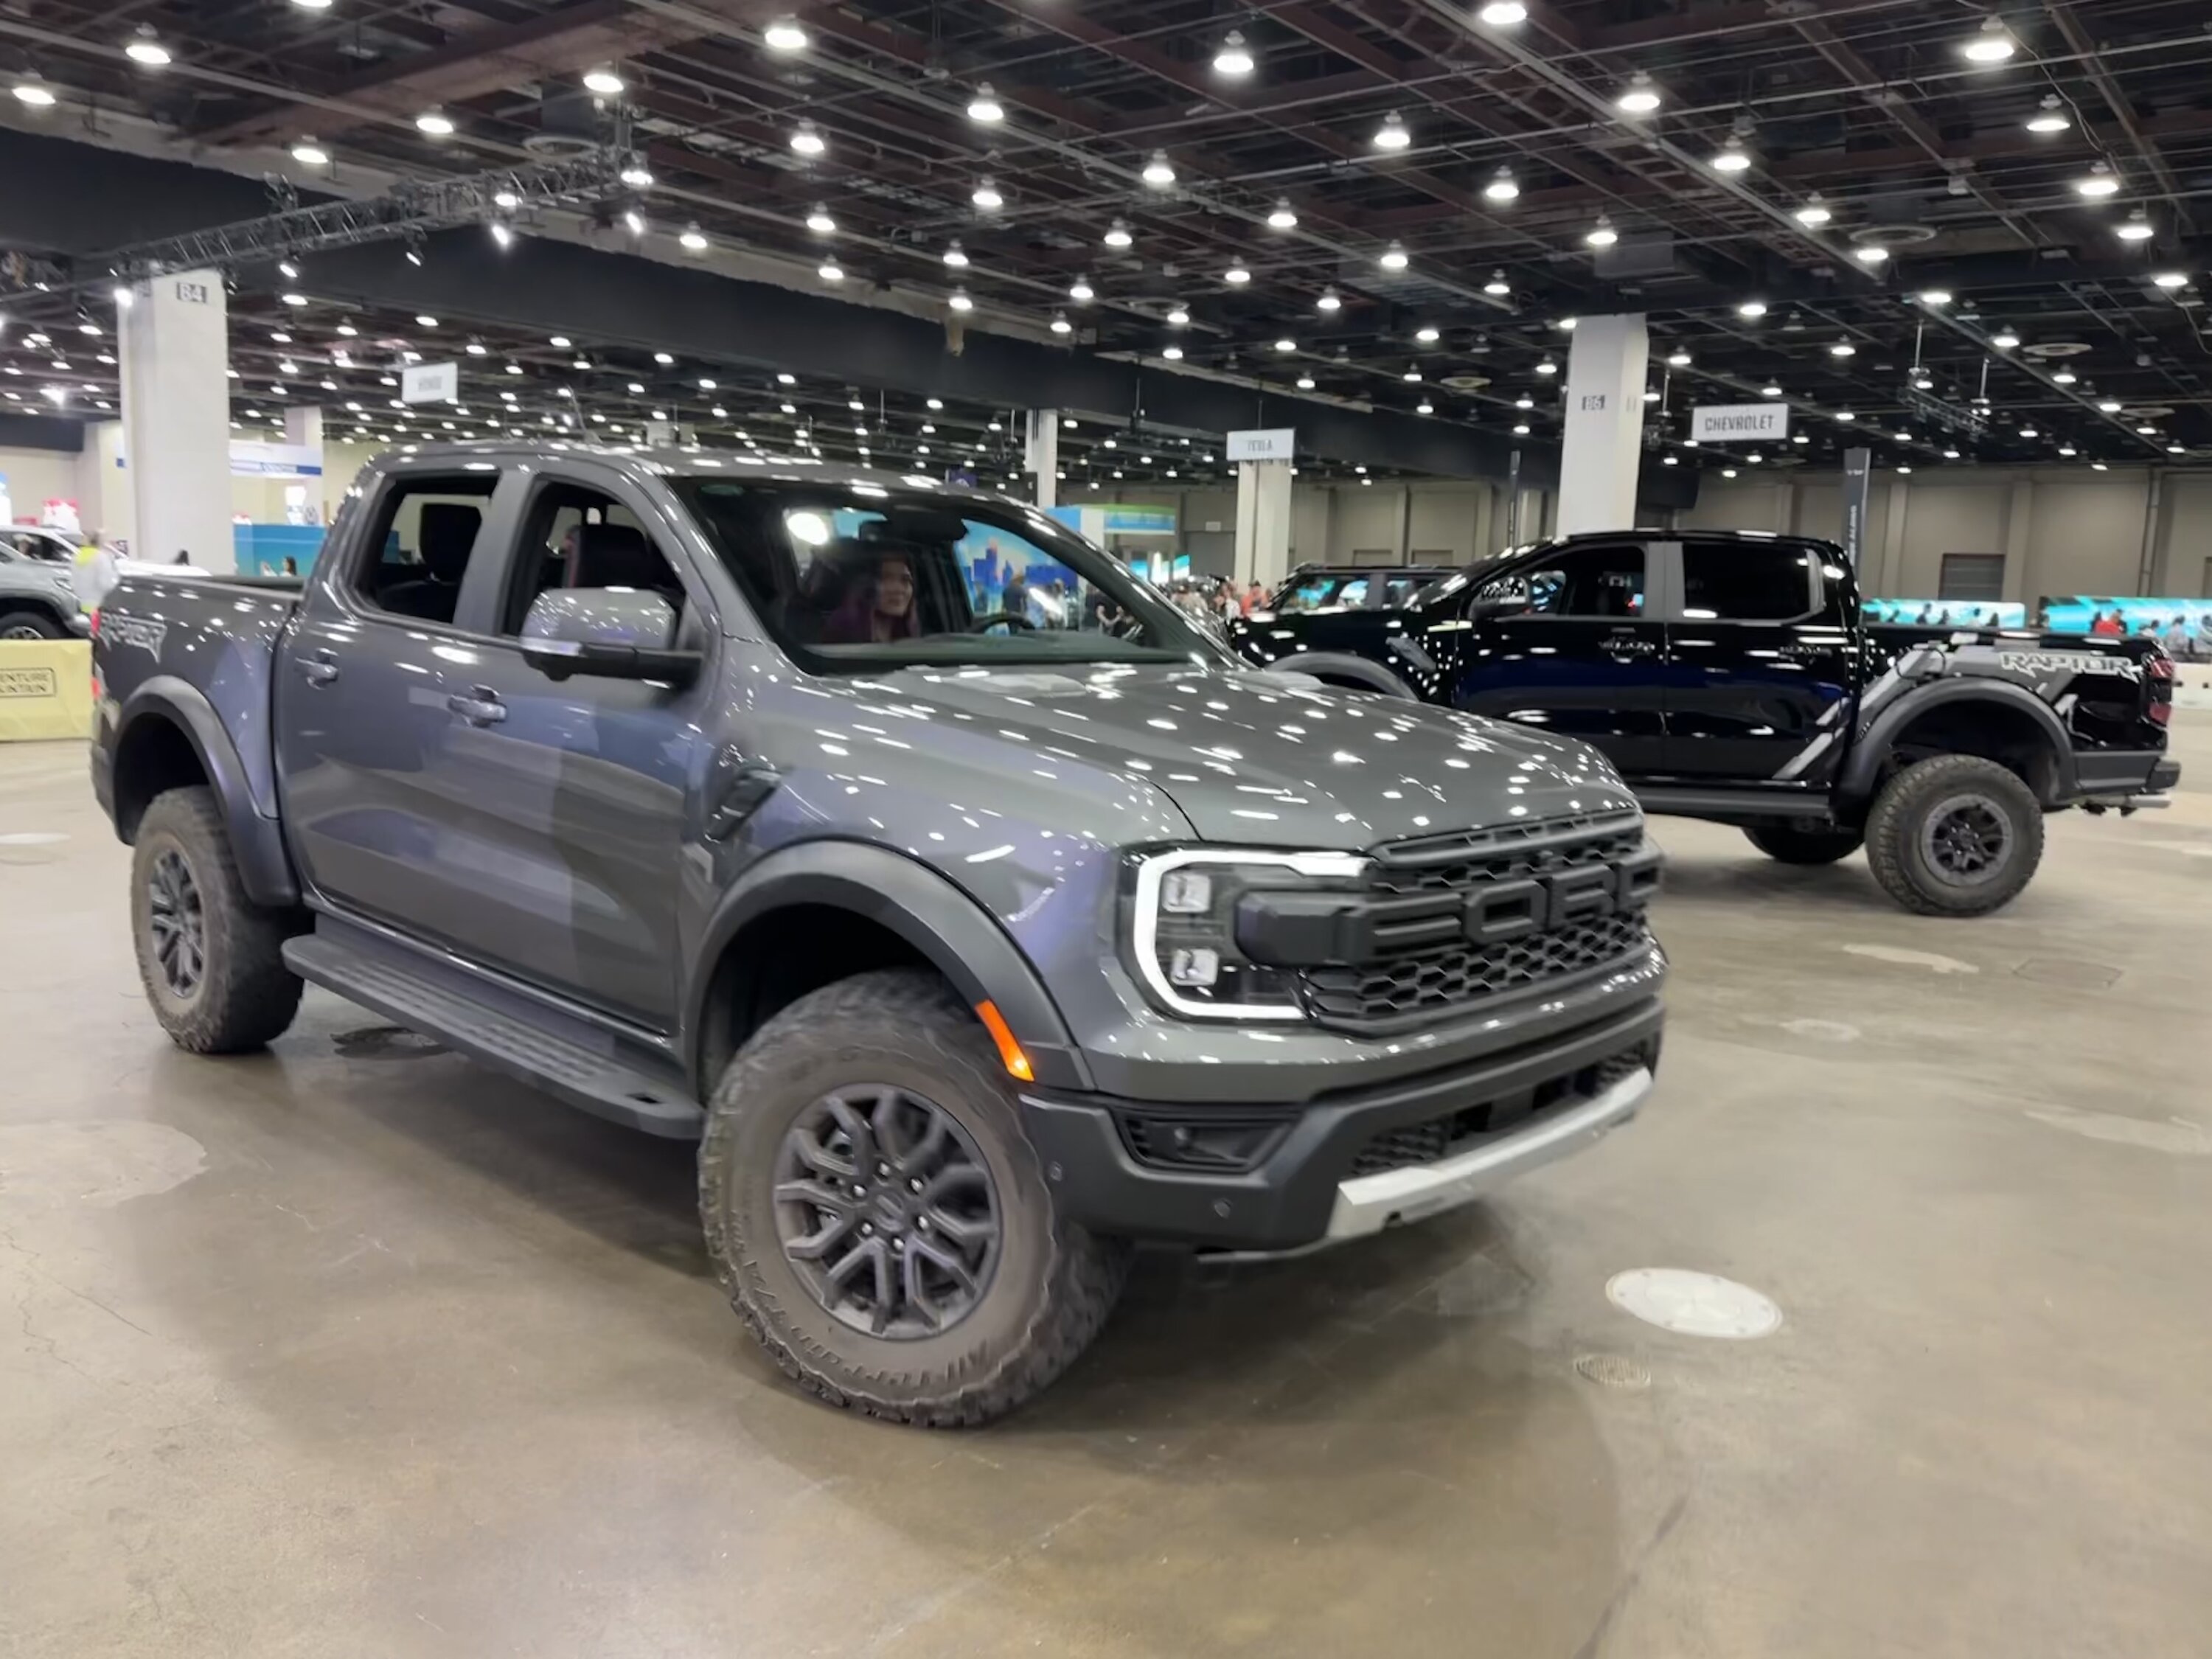 2024 Ranger Raptor is 110% worth the money my impressions from impromptu  visit to Detroit Autoshow